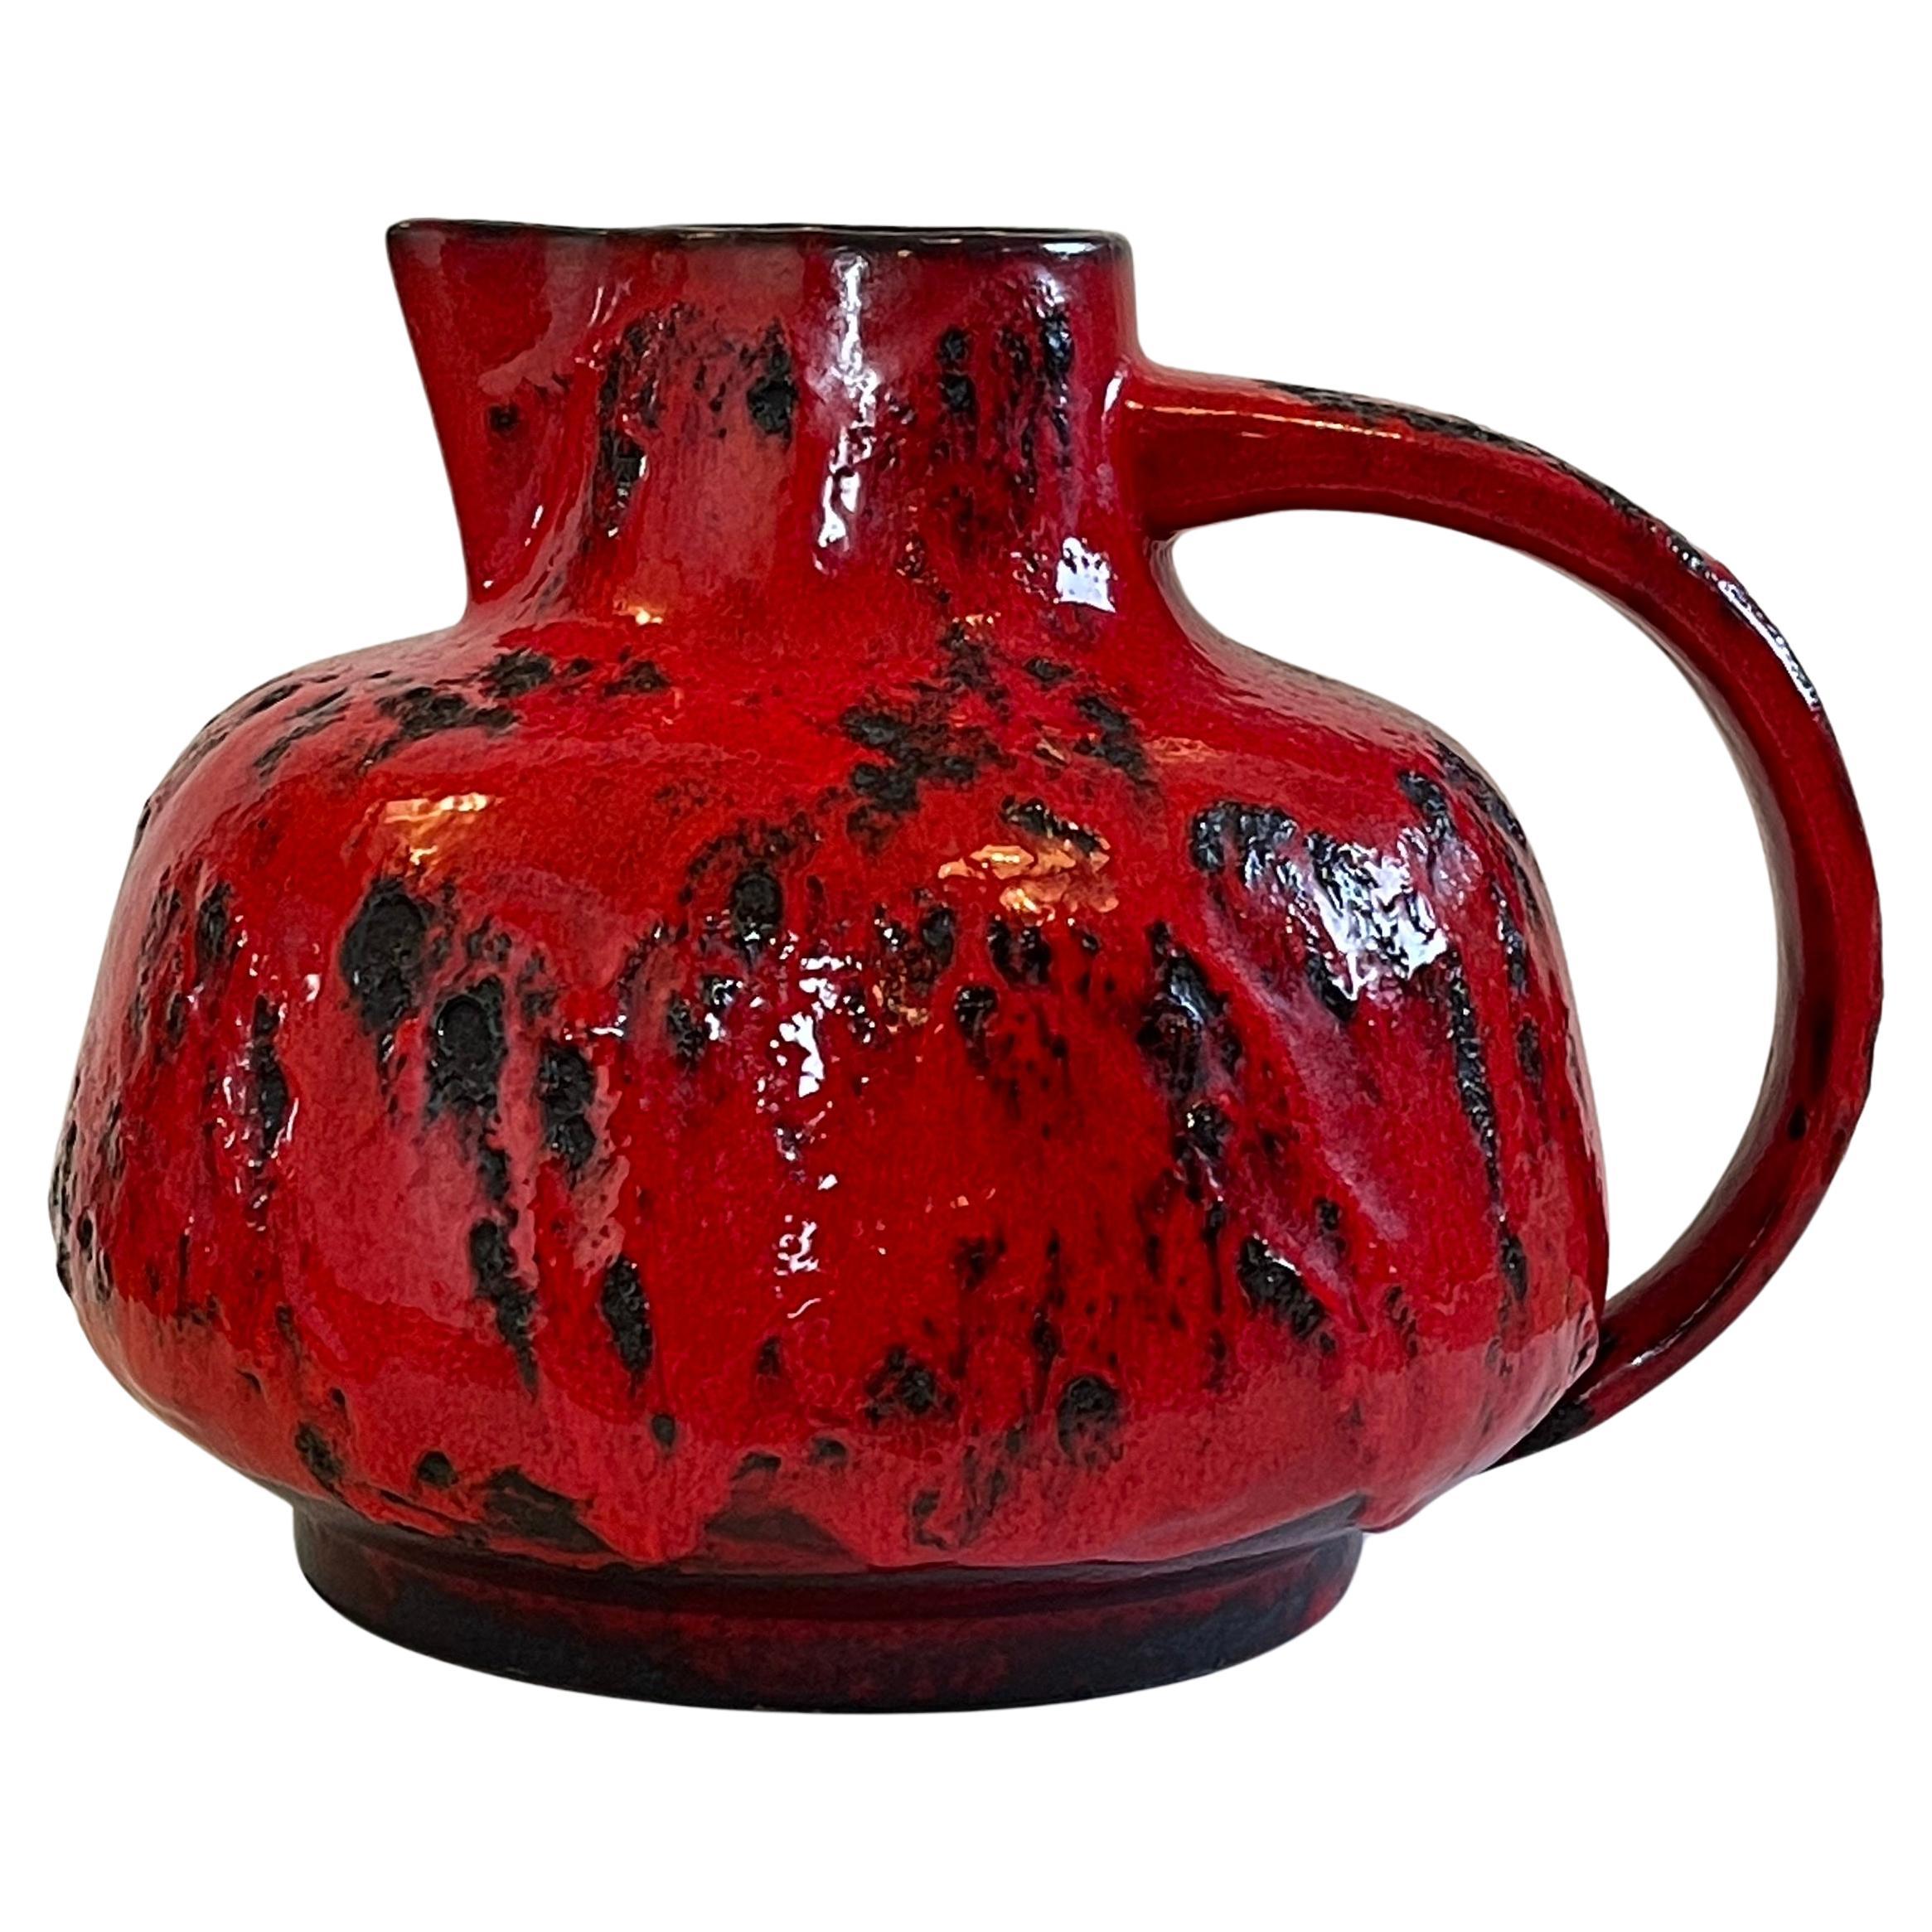 Expressive and very large German mid century modern handmade ceramic vase or jug in an impressive chunky and fiery red.
''Fat Lava'' ceramic at it's best by studio artist Ursula Beyrau for Graeflich Ortenburg, Germany.
Fantastic timeless shape